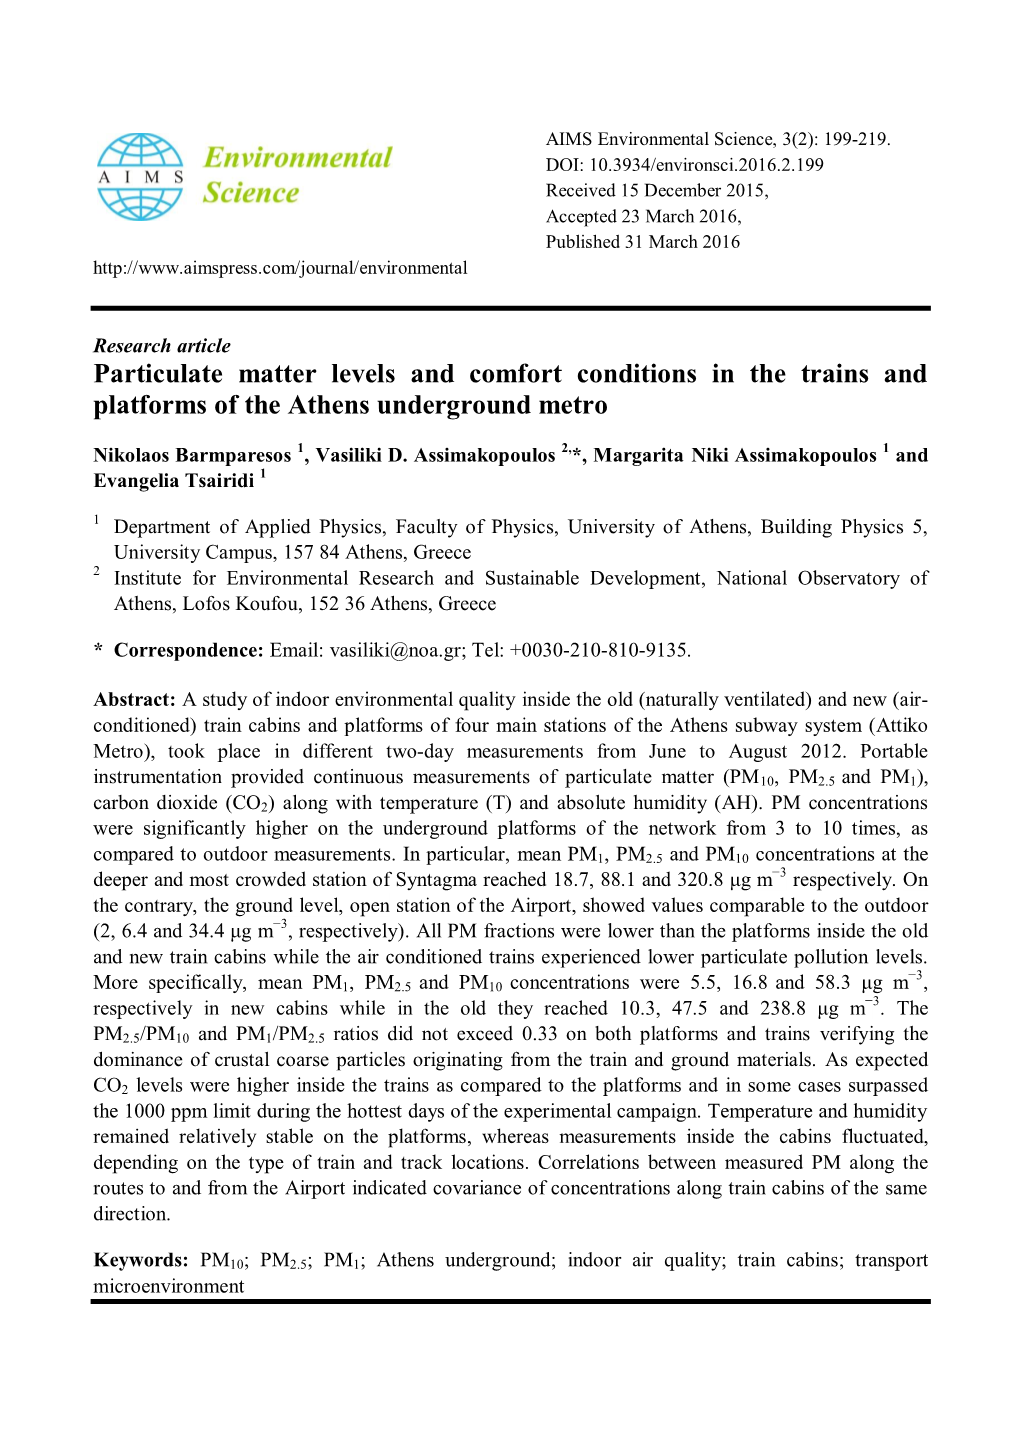 Particulate Matter Levels and Comfort Conditions in the Trains and Platforms of the Athens Underground Metro